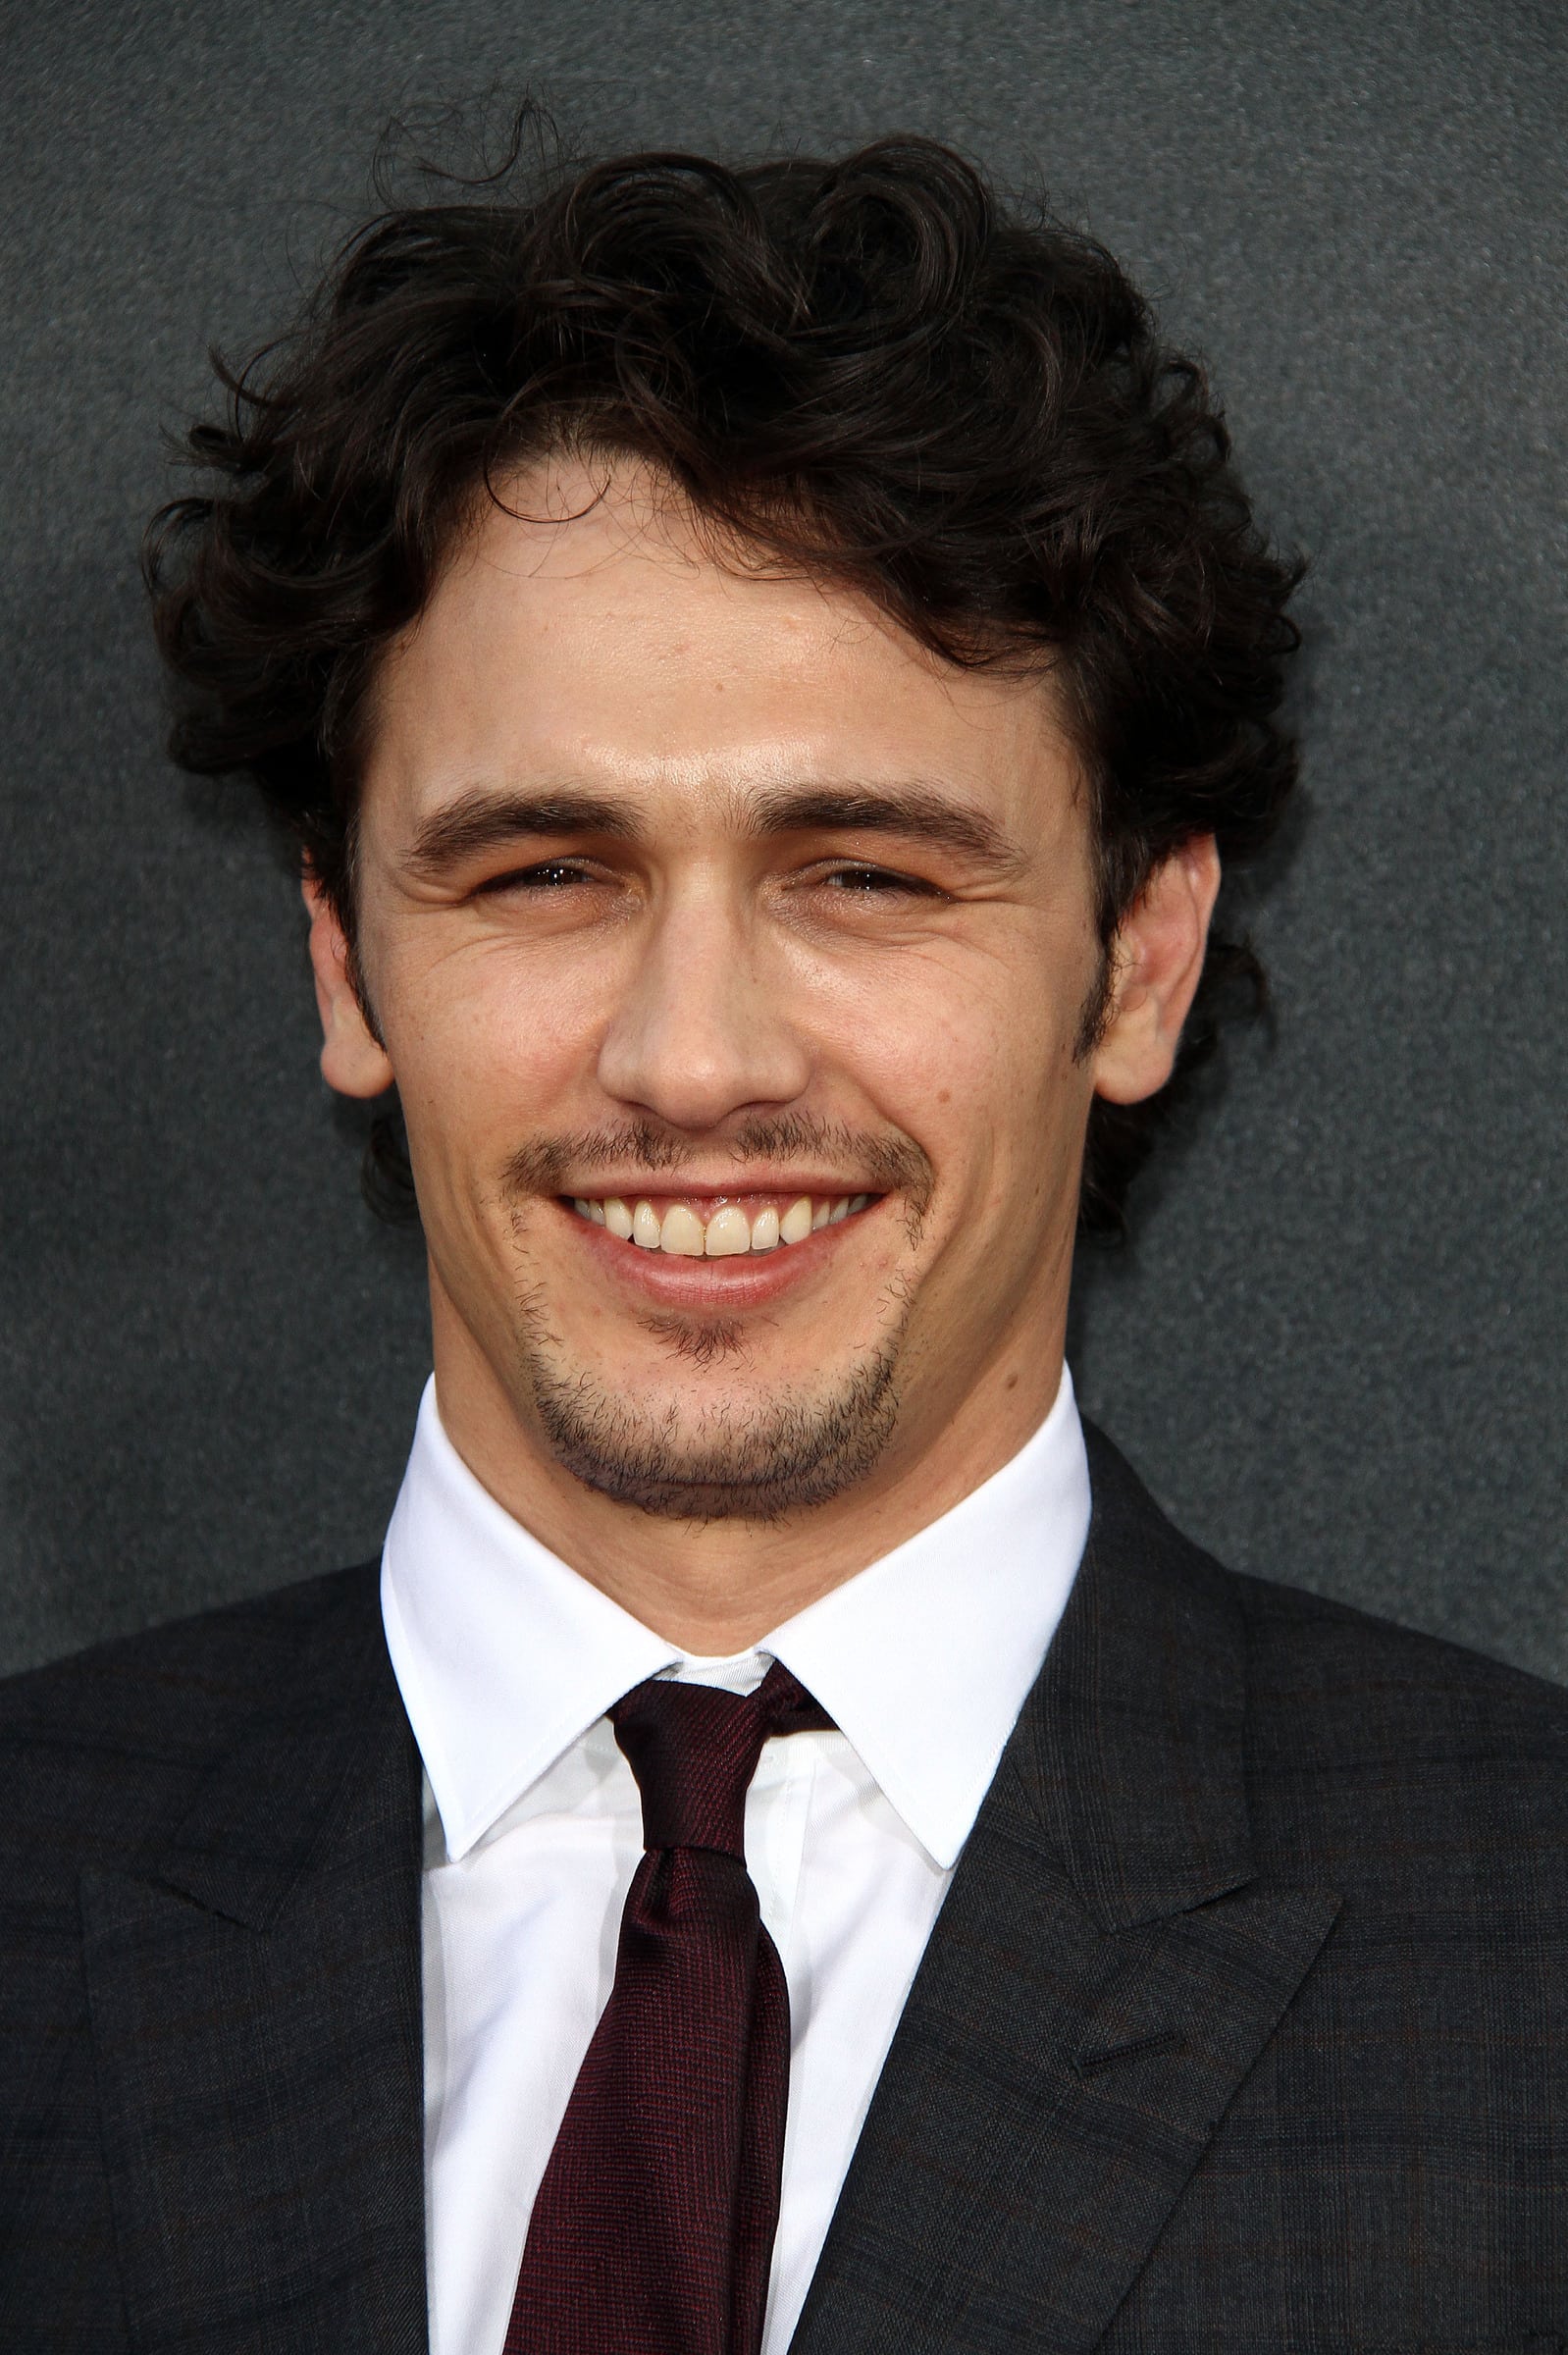 James Franco To Direct And Star In The Garden Of Last Days Movie